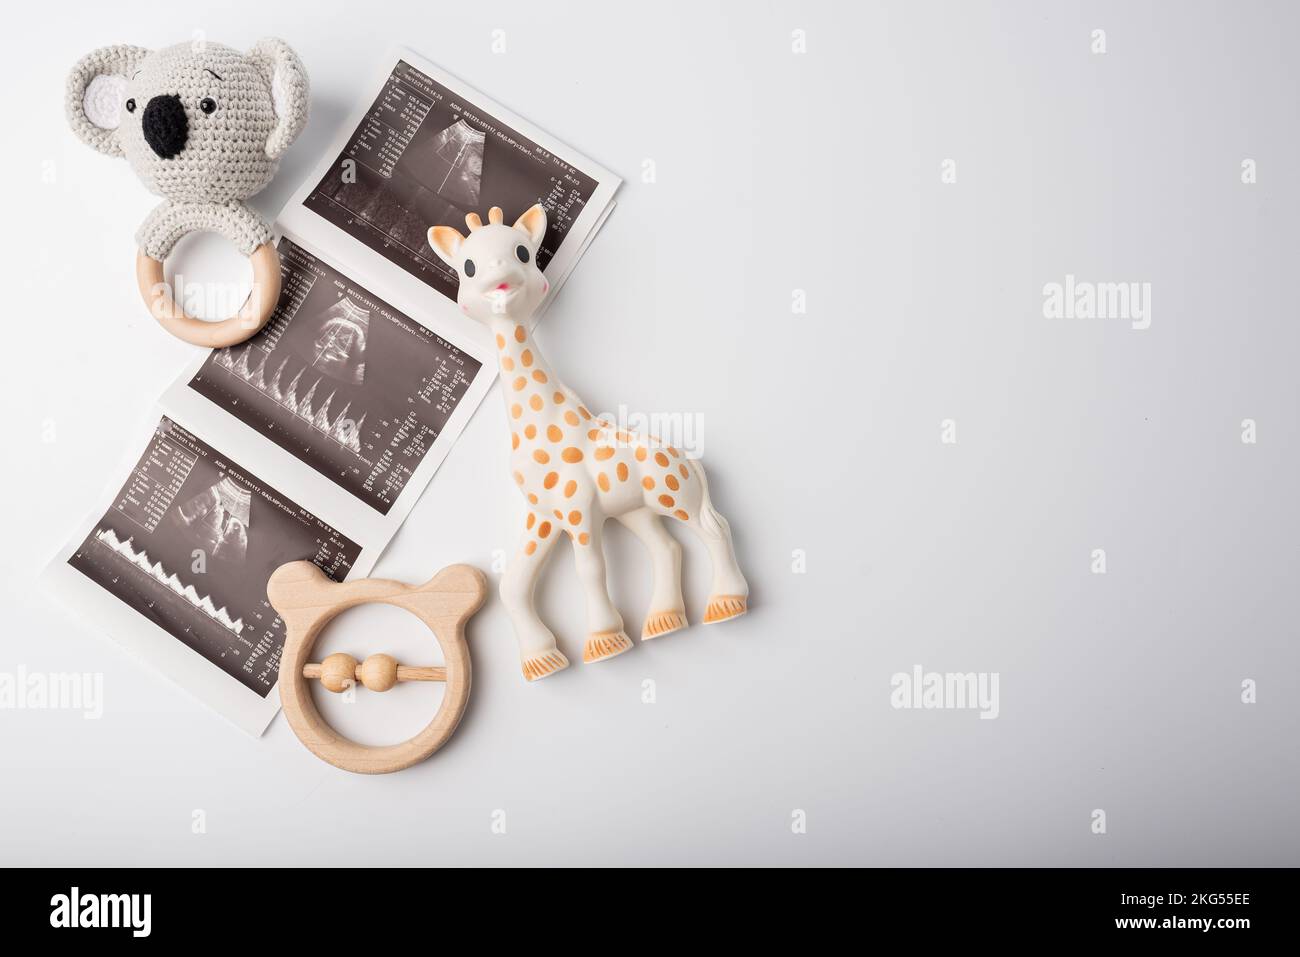 Baby toys with ultrasound picture pregnant concept on white background Stock Photo